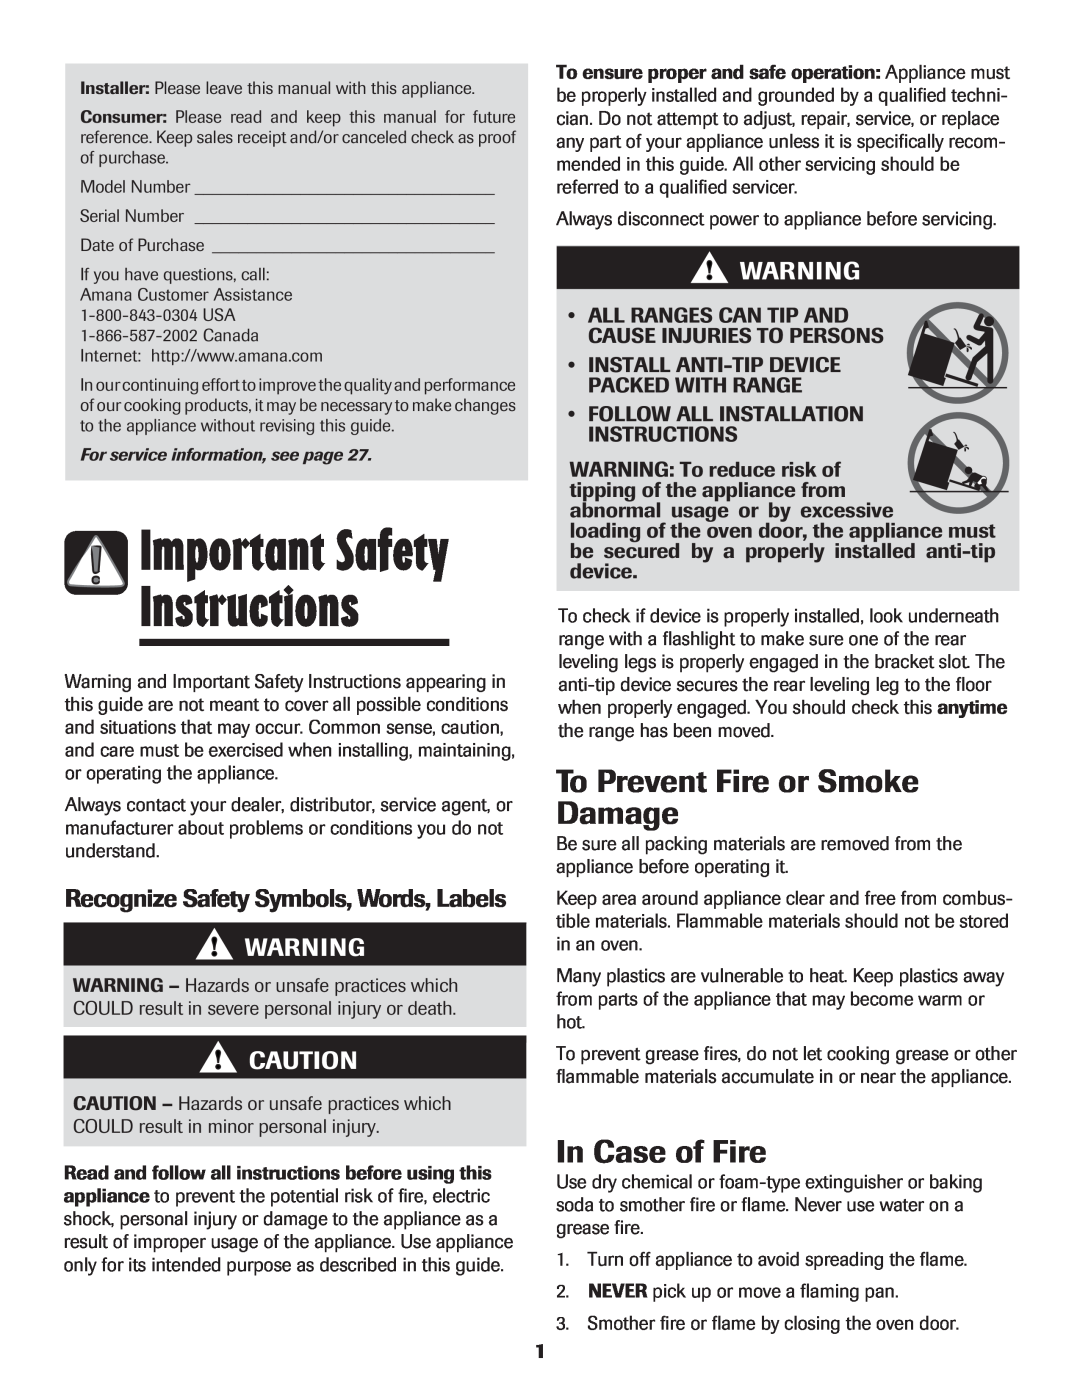 Amana 8113P454-60 warranty Instructions, Important Safety, To Prevent Fire or Smoke Damage, In Case of Fire 